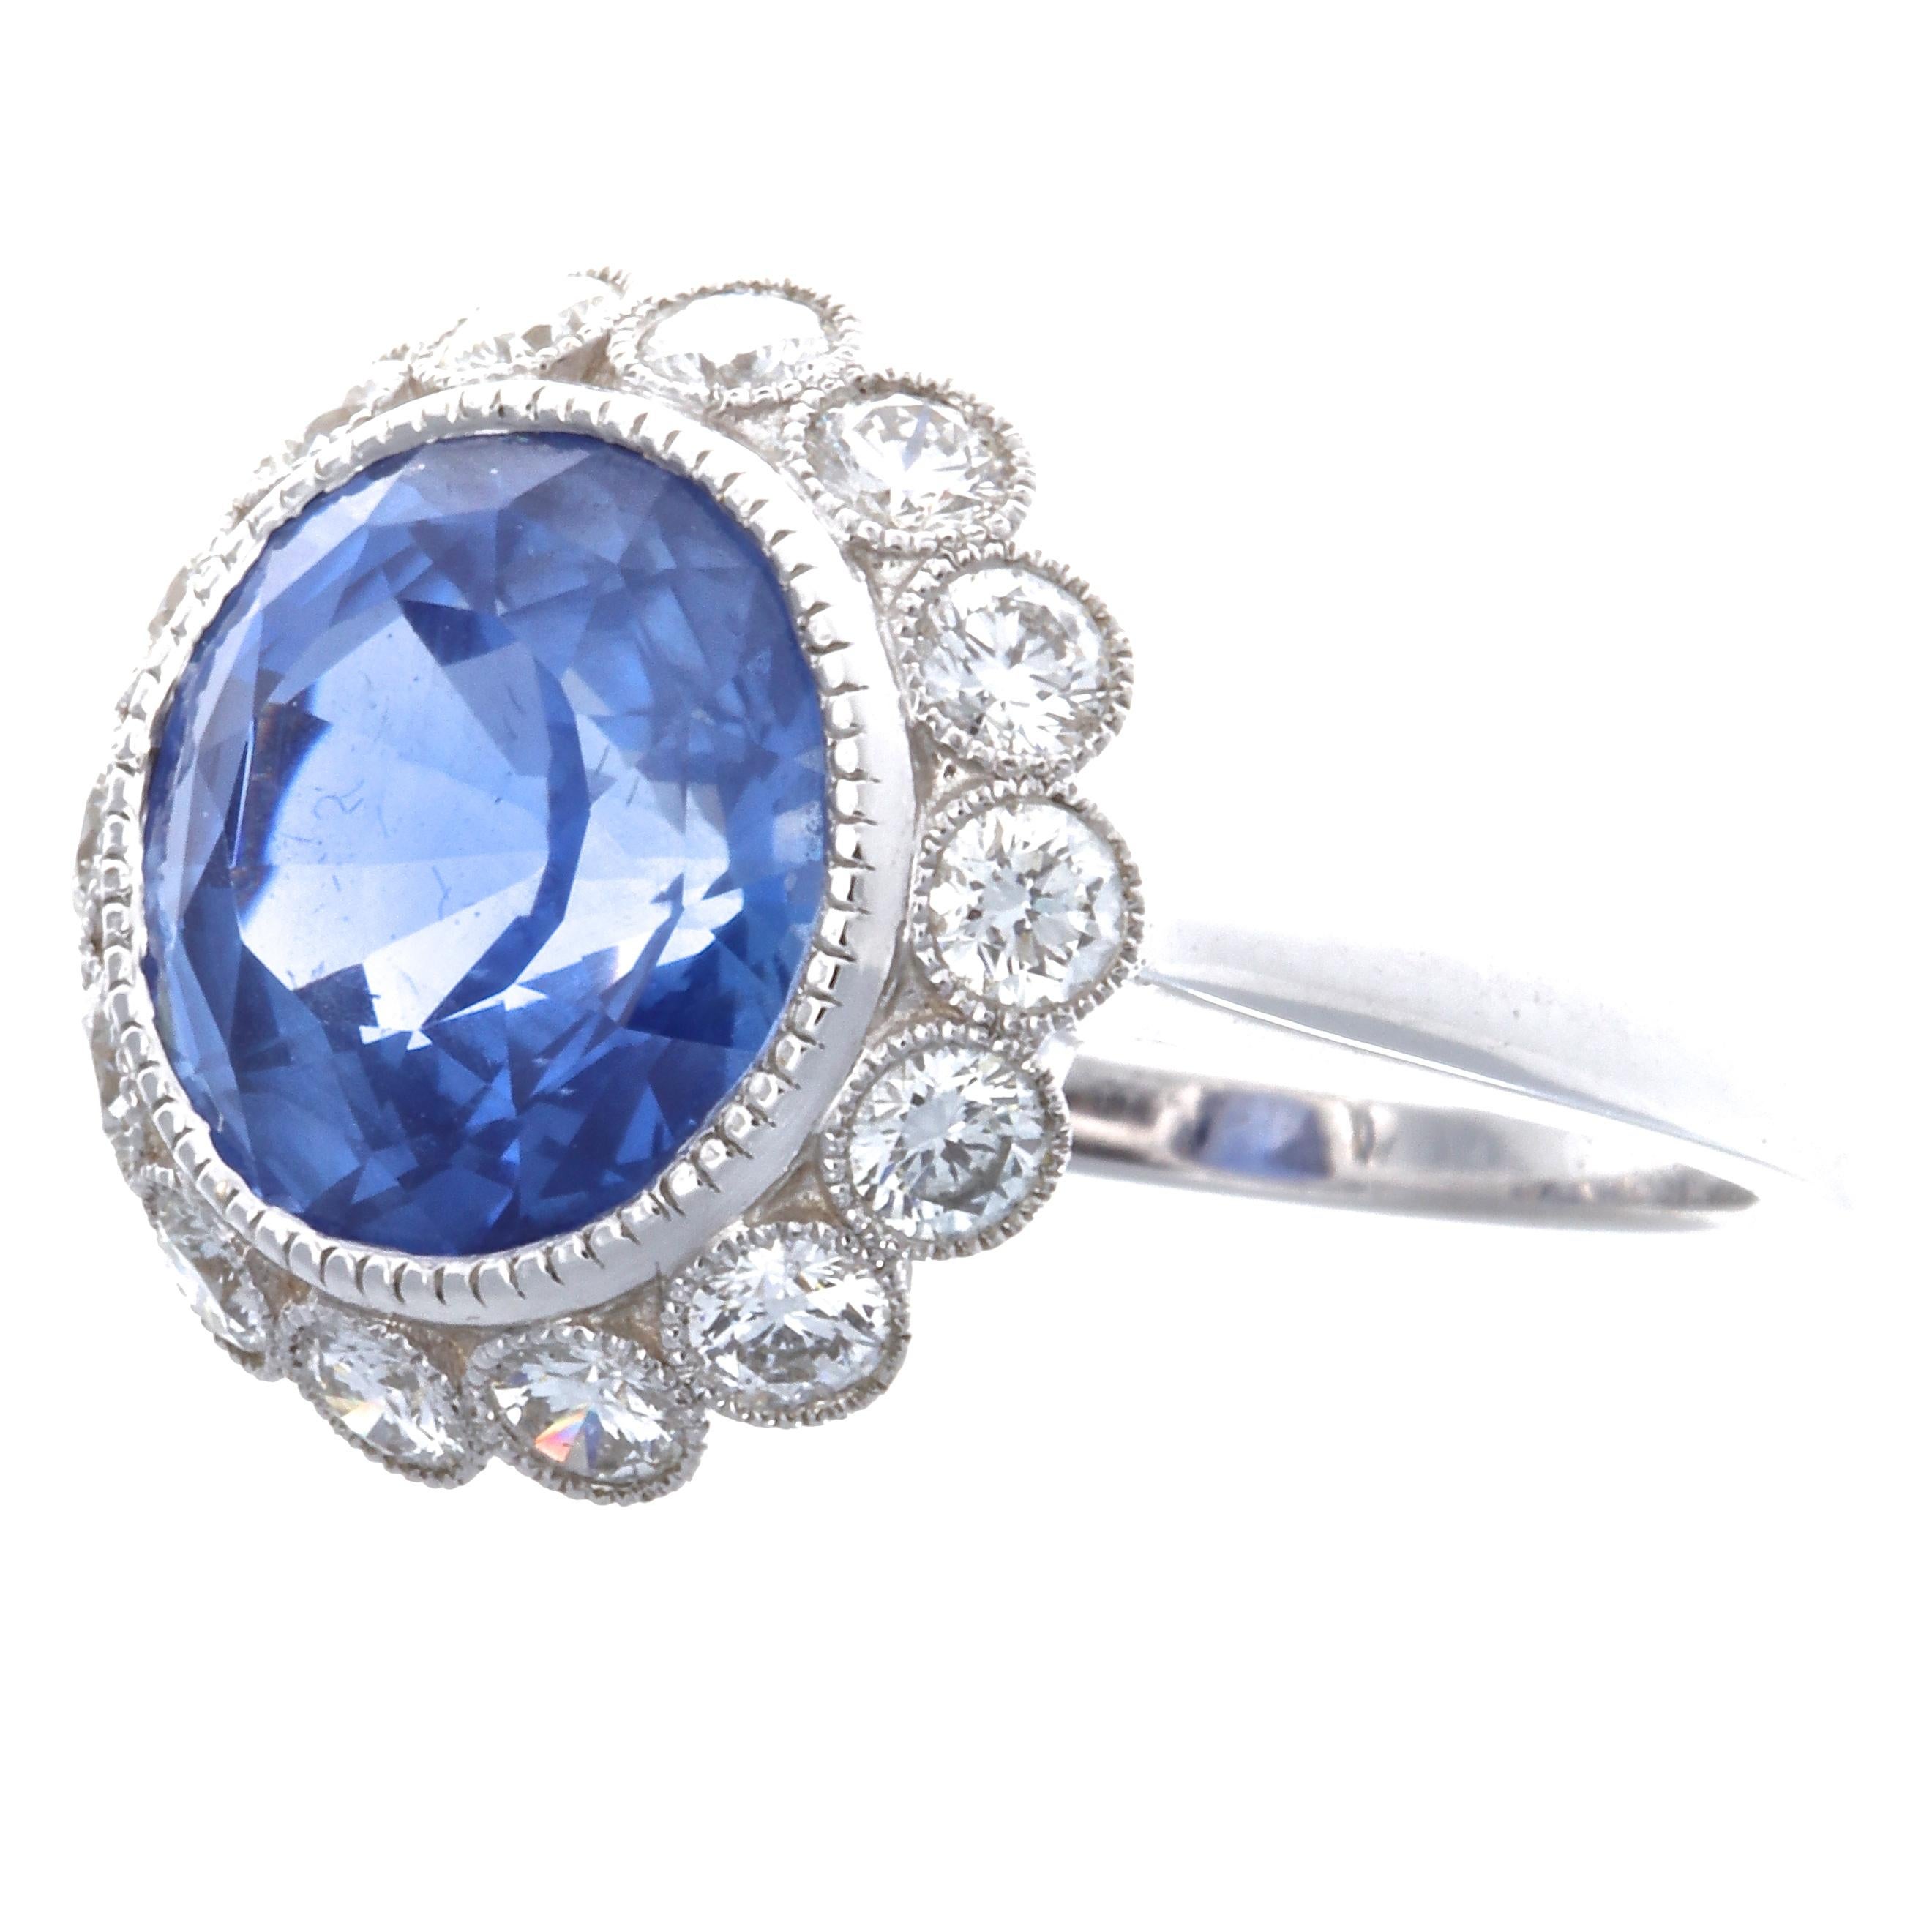 Burma sapphires are known for their striking, vibrant blue color. They are also extremely rare and highly desirable among estate jewelry collectors. This uncommon round cut Burma Sapphire is the perfect accessory to add some color to your look and